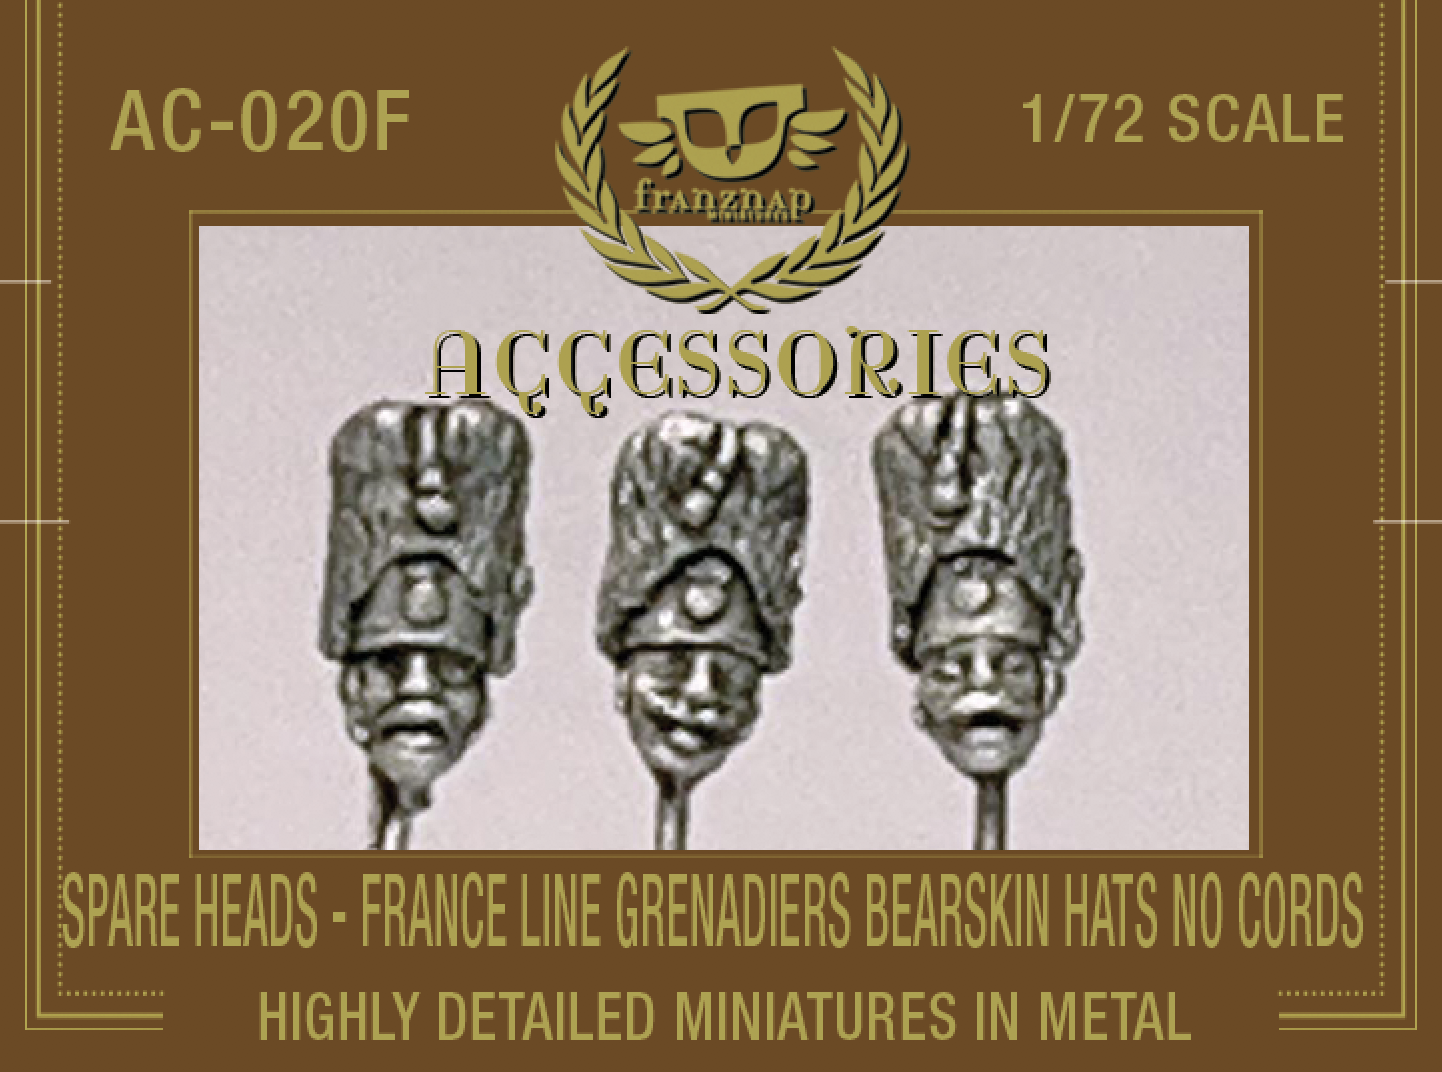 AC-020F SPARE HEADS France Line Grenadiers Bearskin Hats no cords